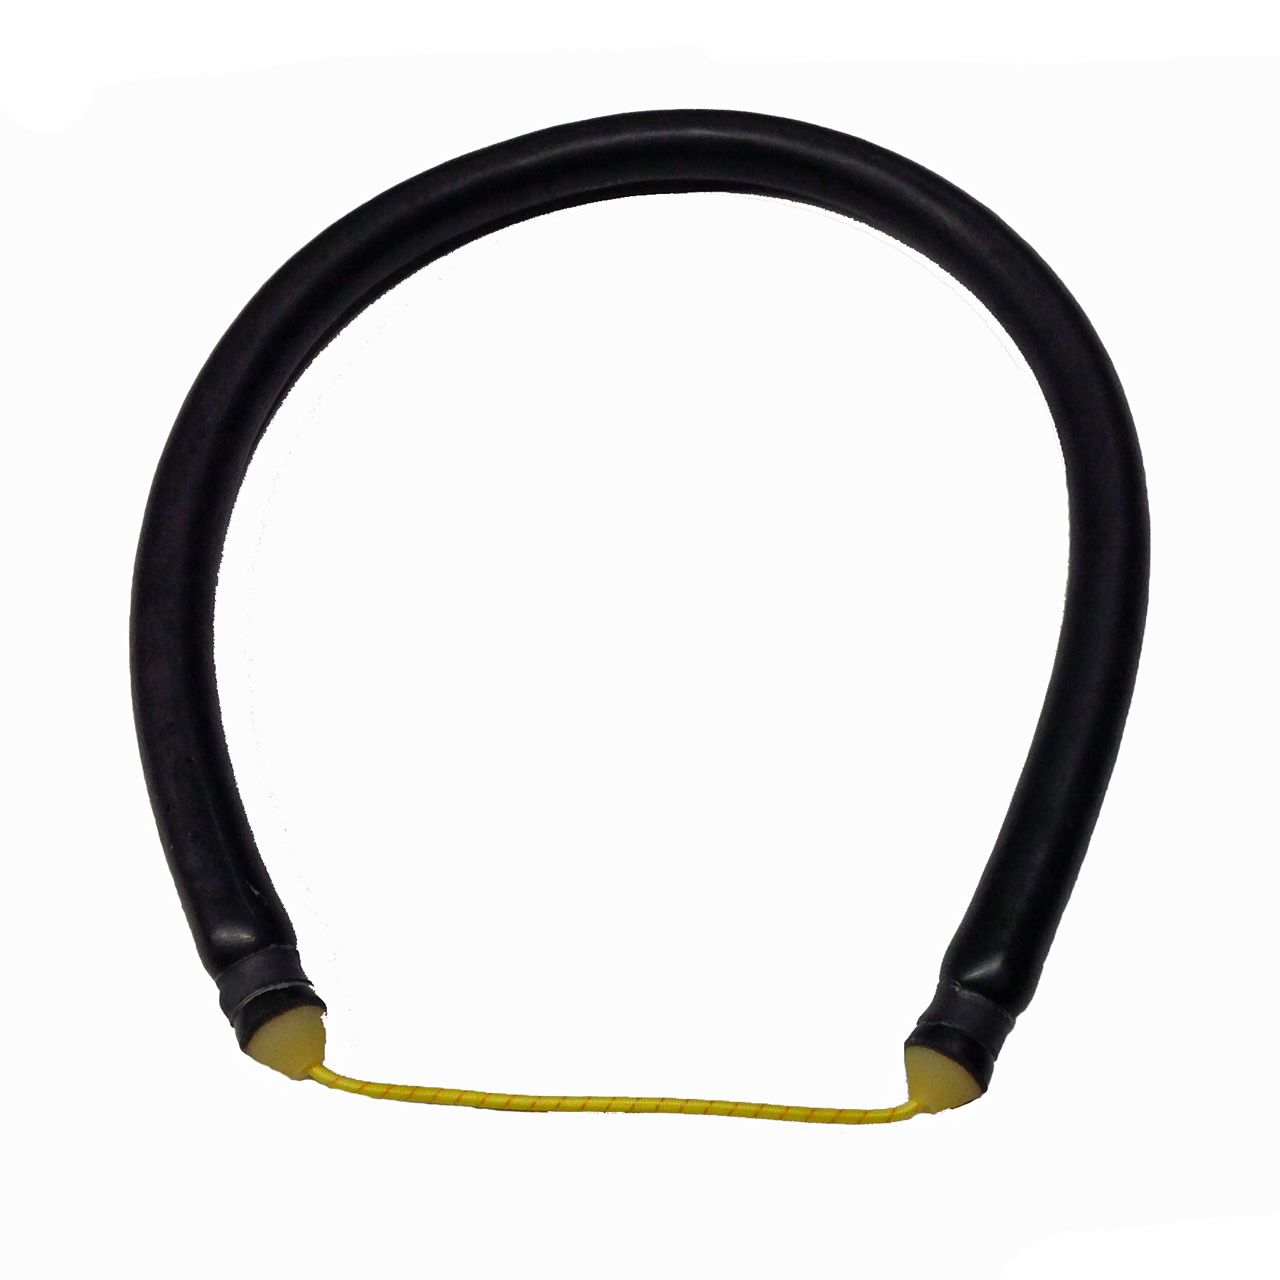 Riffe 5/16 Power Bands (16mm) | Black